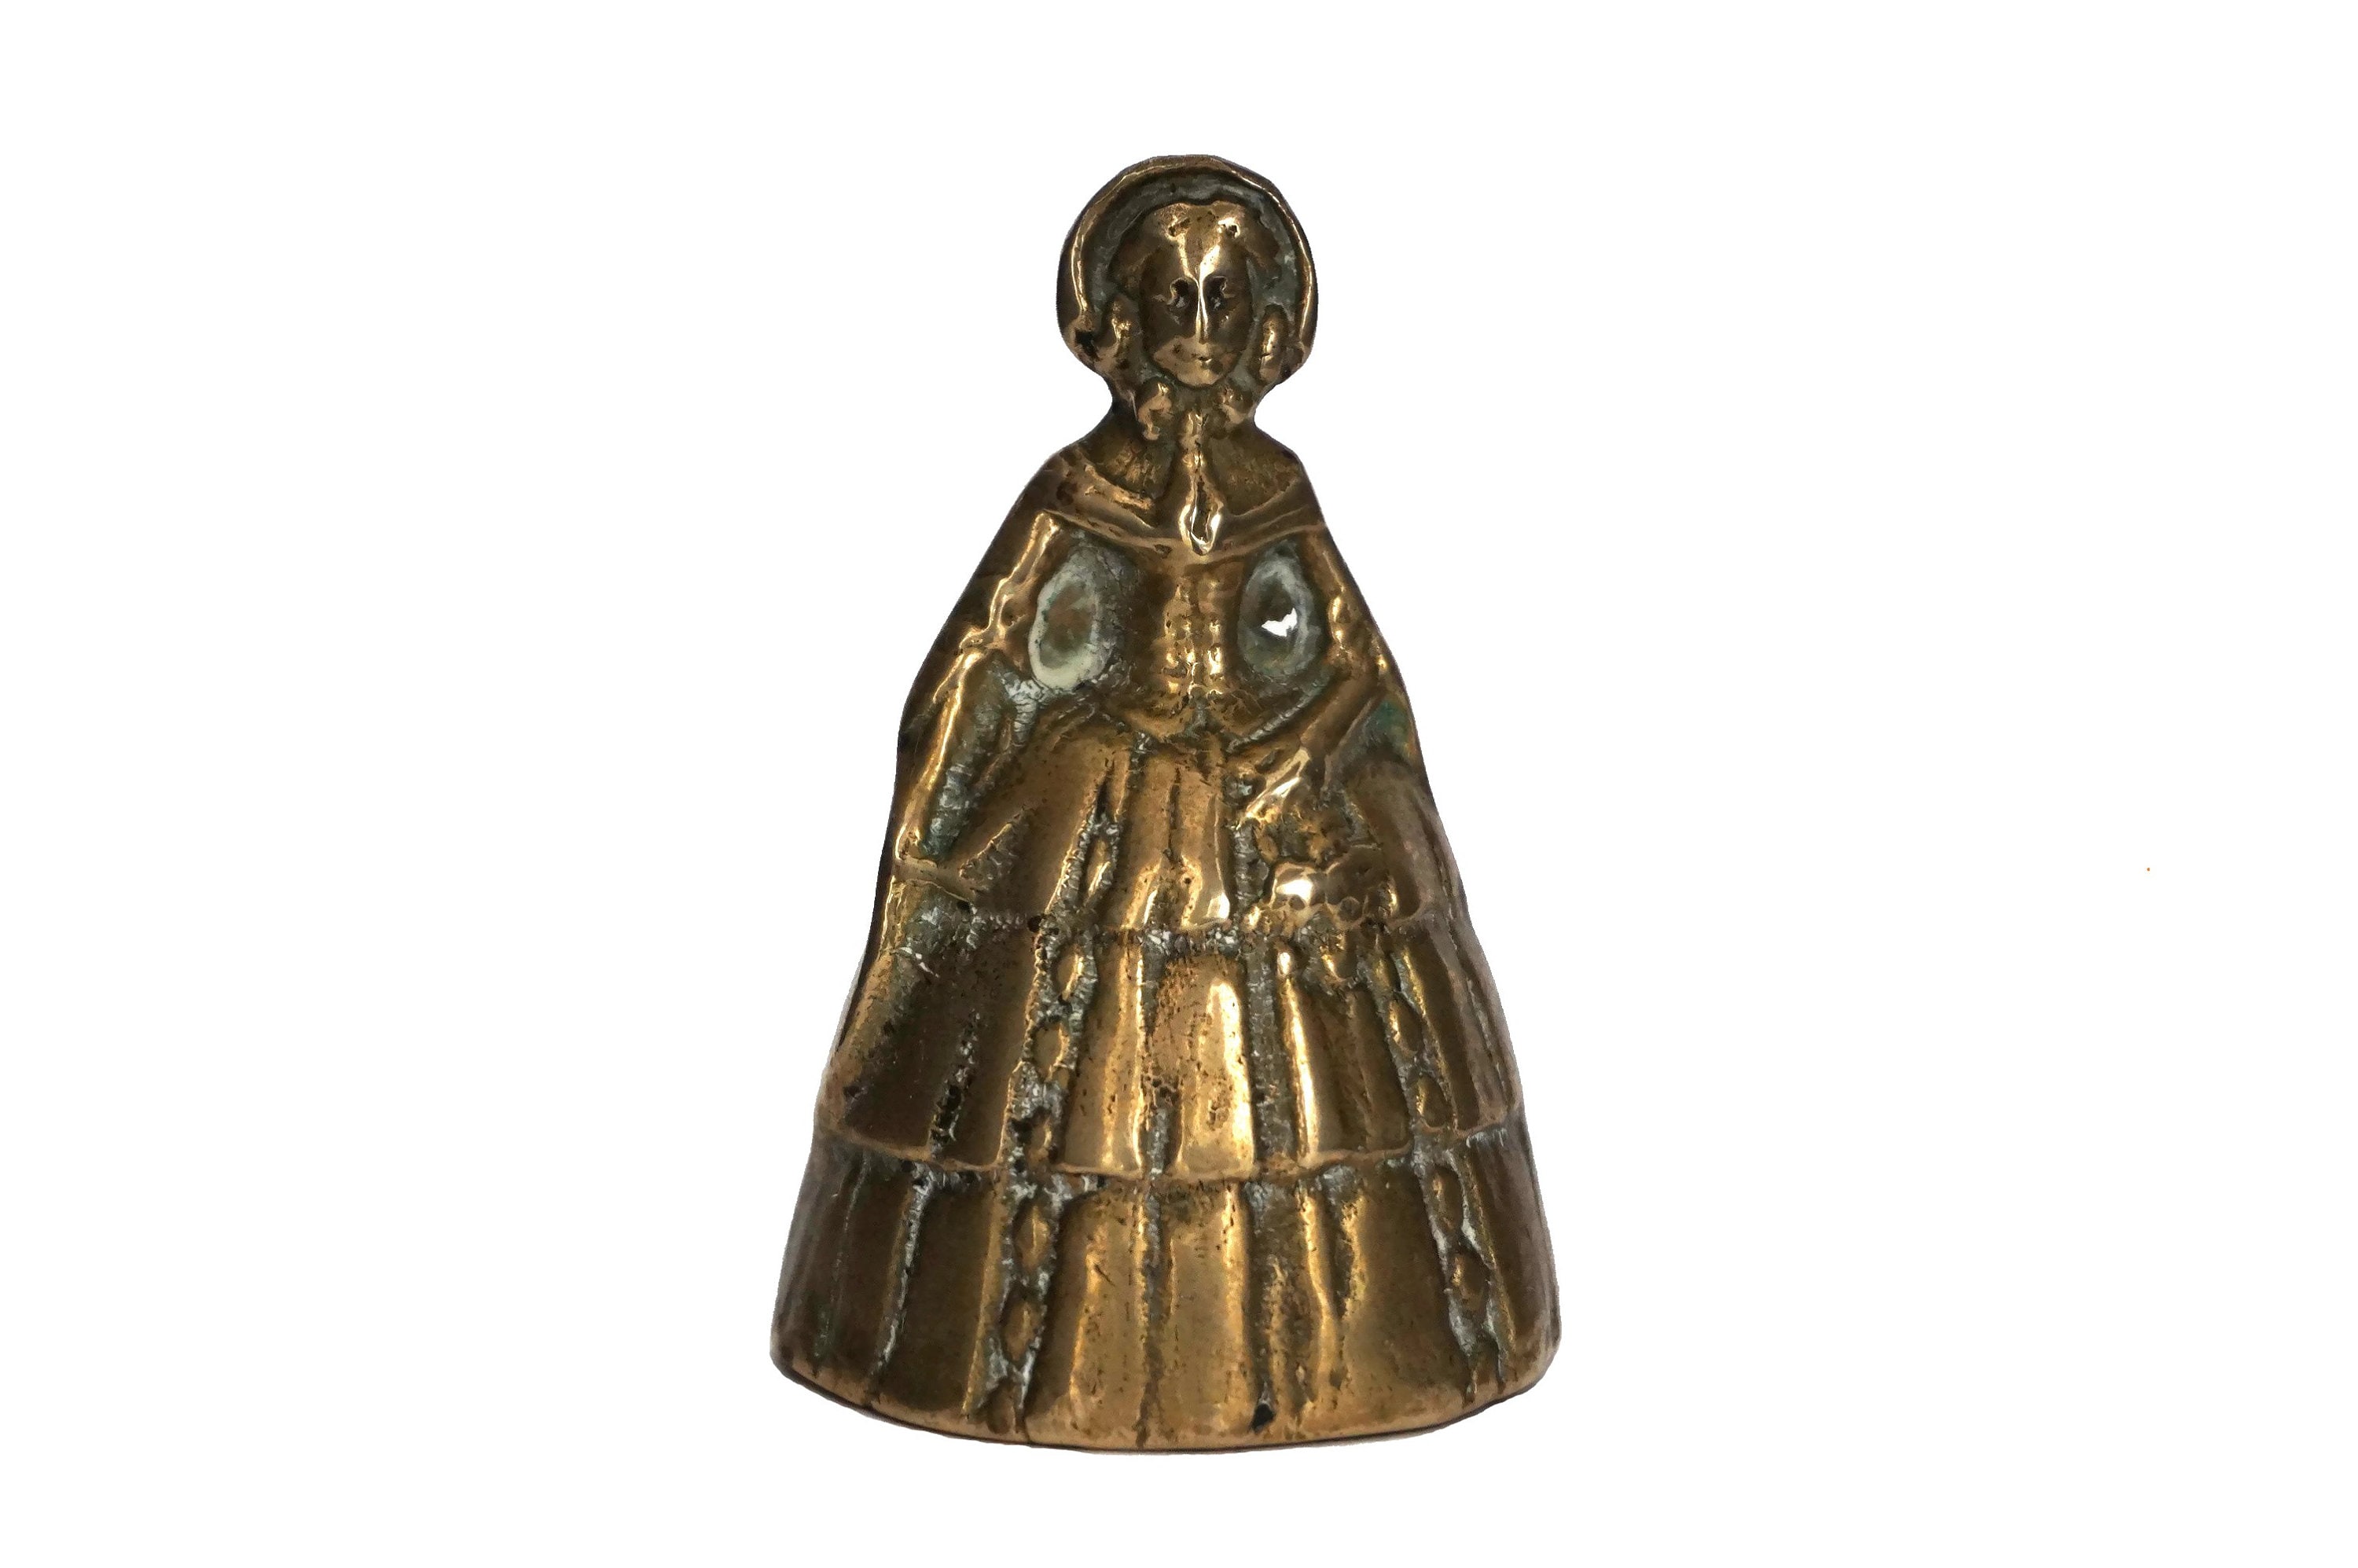 Brass Victorian Lady Table Bell, Vintage Figurine Service Bell